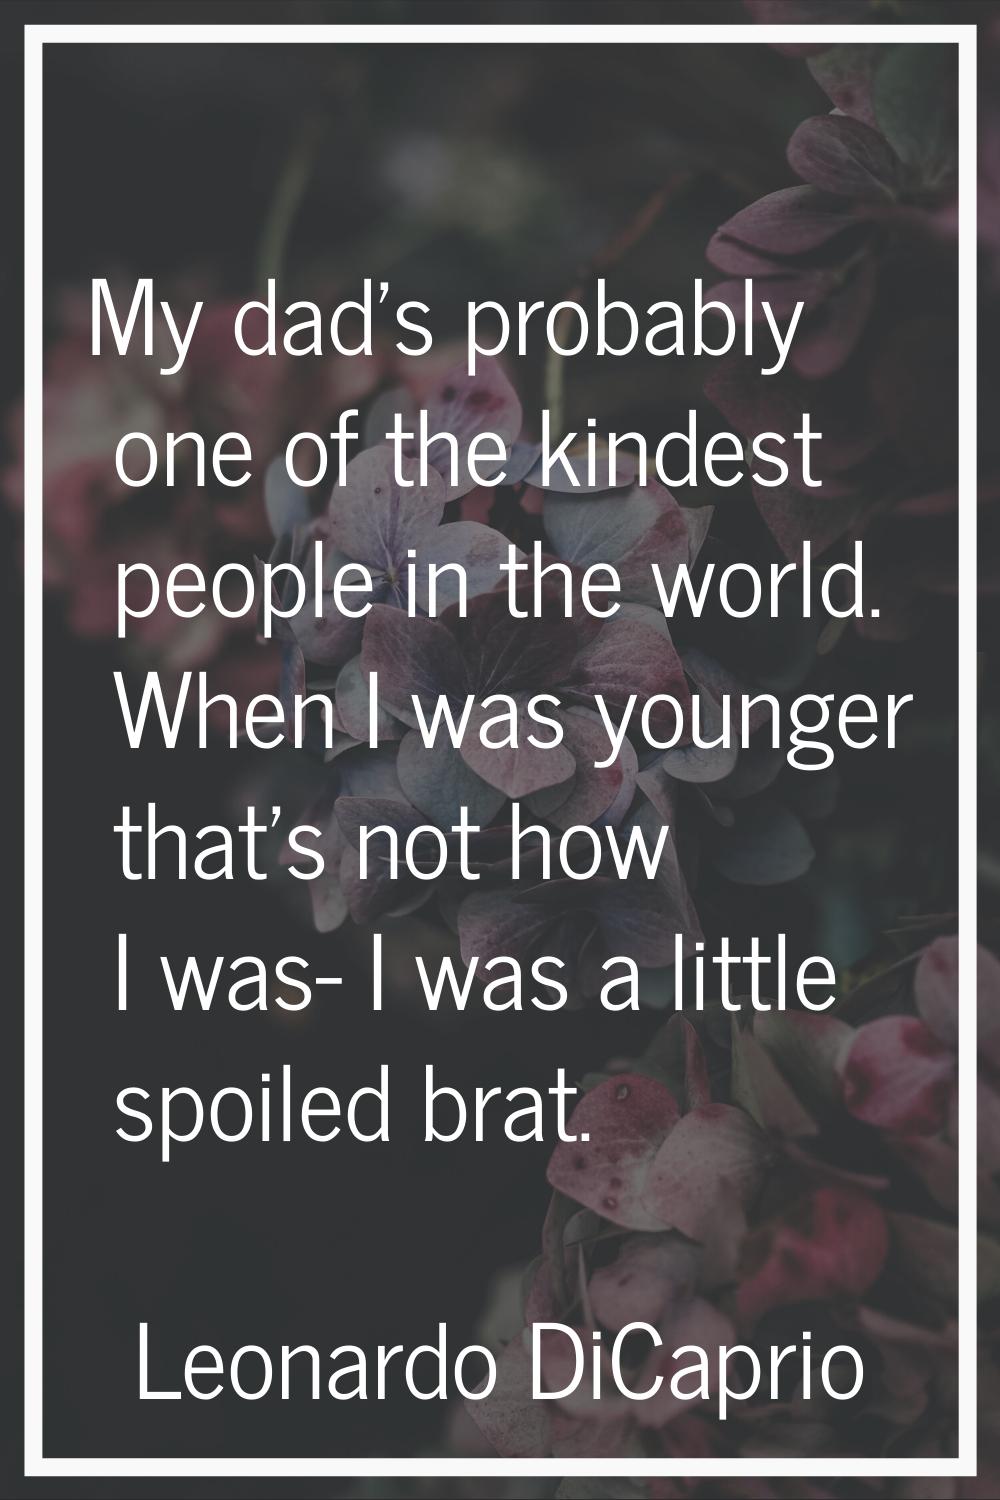 My dad's probably one of the kindest people in the world. When I was younger that's not how I was- 